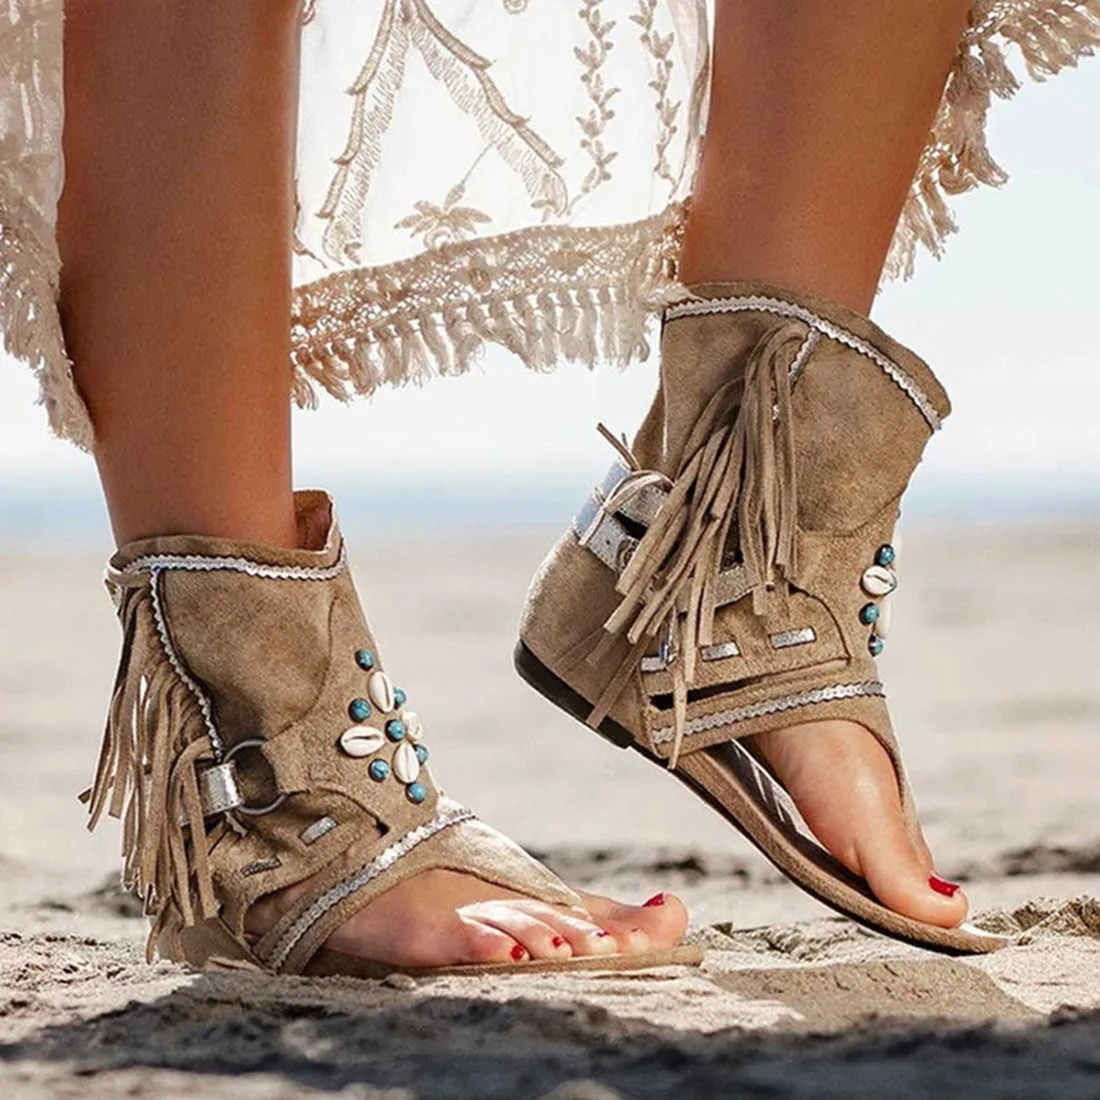 Women Retro Clip Toe Sandals Ladies Gladiator Sexy Vintage Boots Casual Tassel Rome Summer Beach Woman Shoes Female New 2021 Y0721